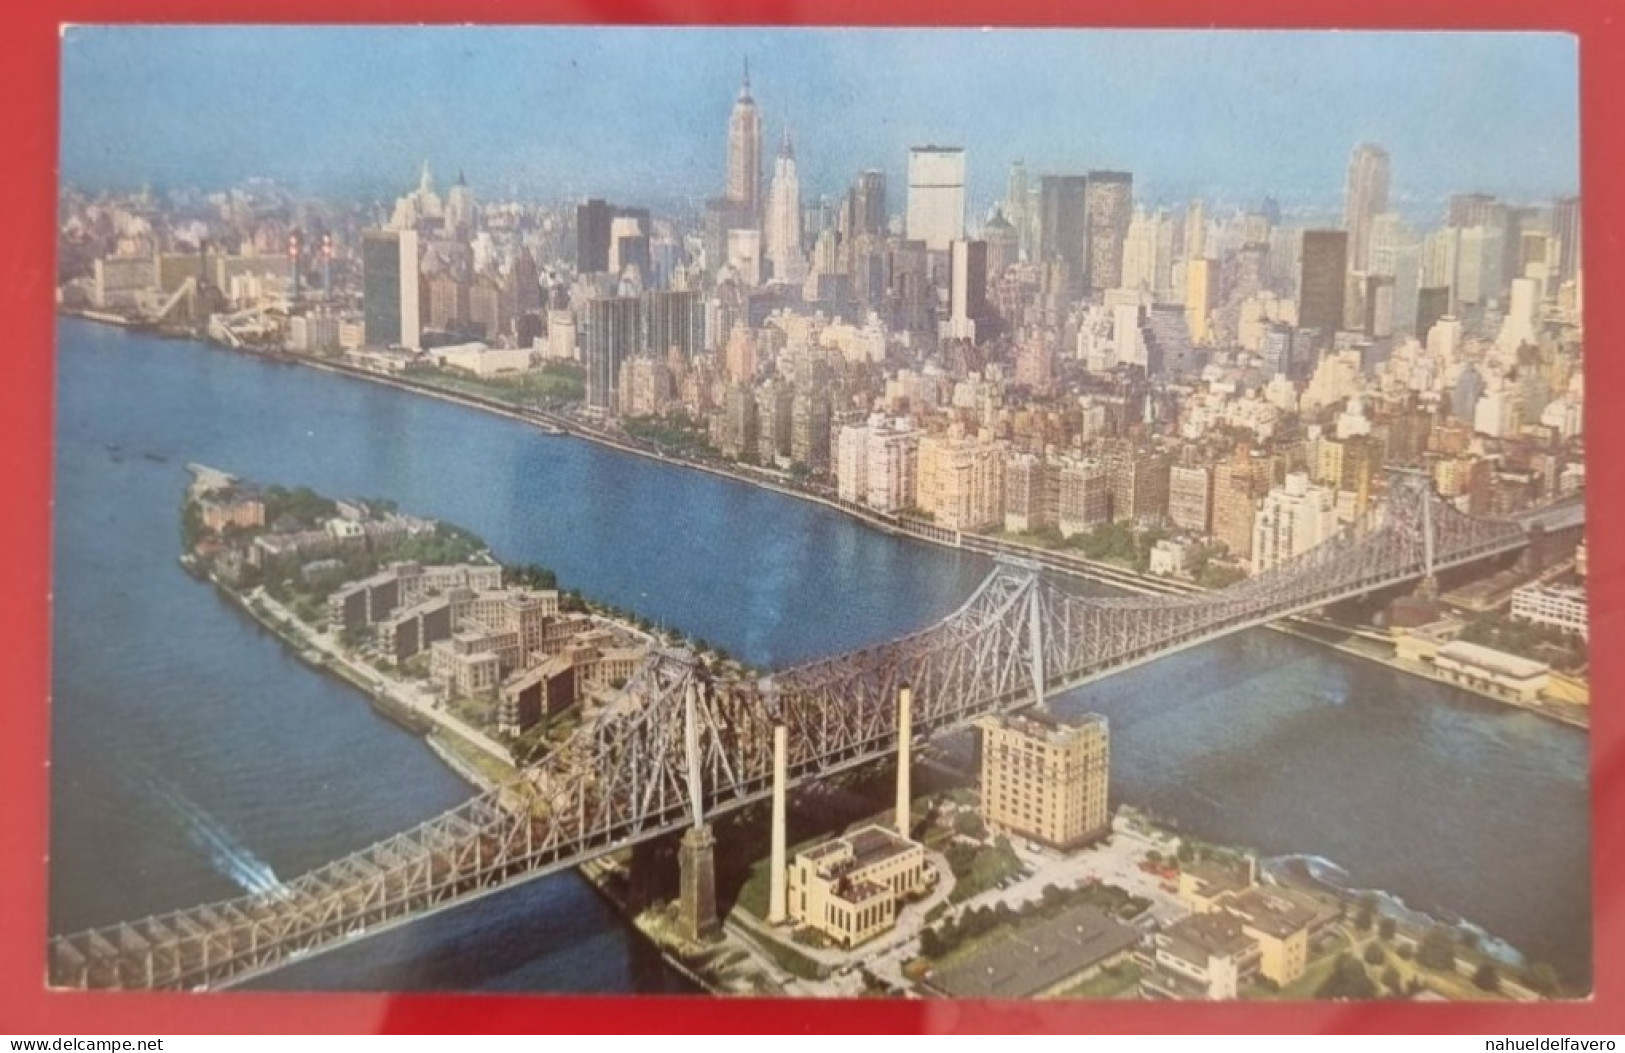 Uncirculated Postcard - USA - NY, NEW YORK CITY - AERIAL VIEW OF 59TH ST. BRIDGE - Puentes Y Túneles